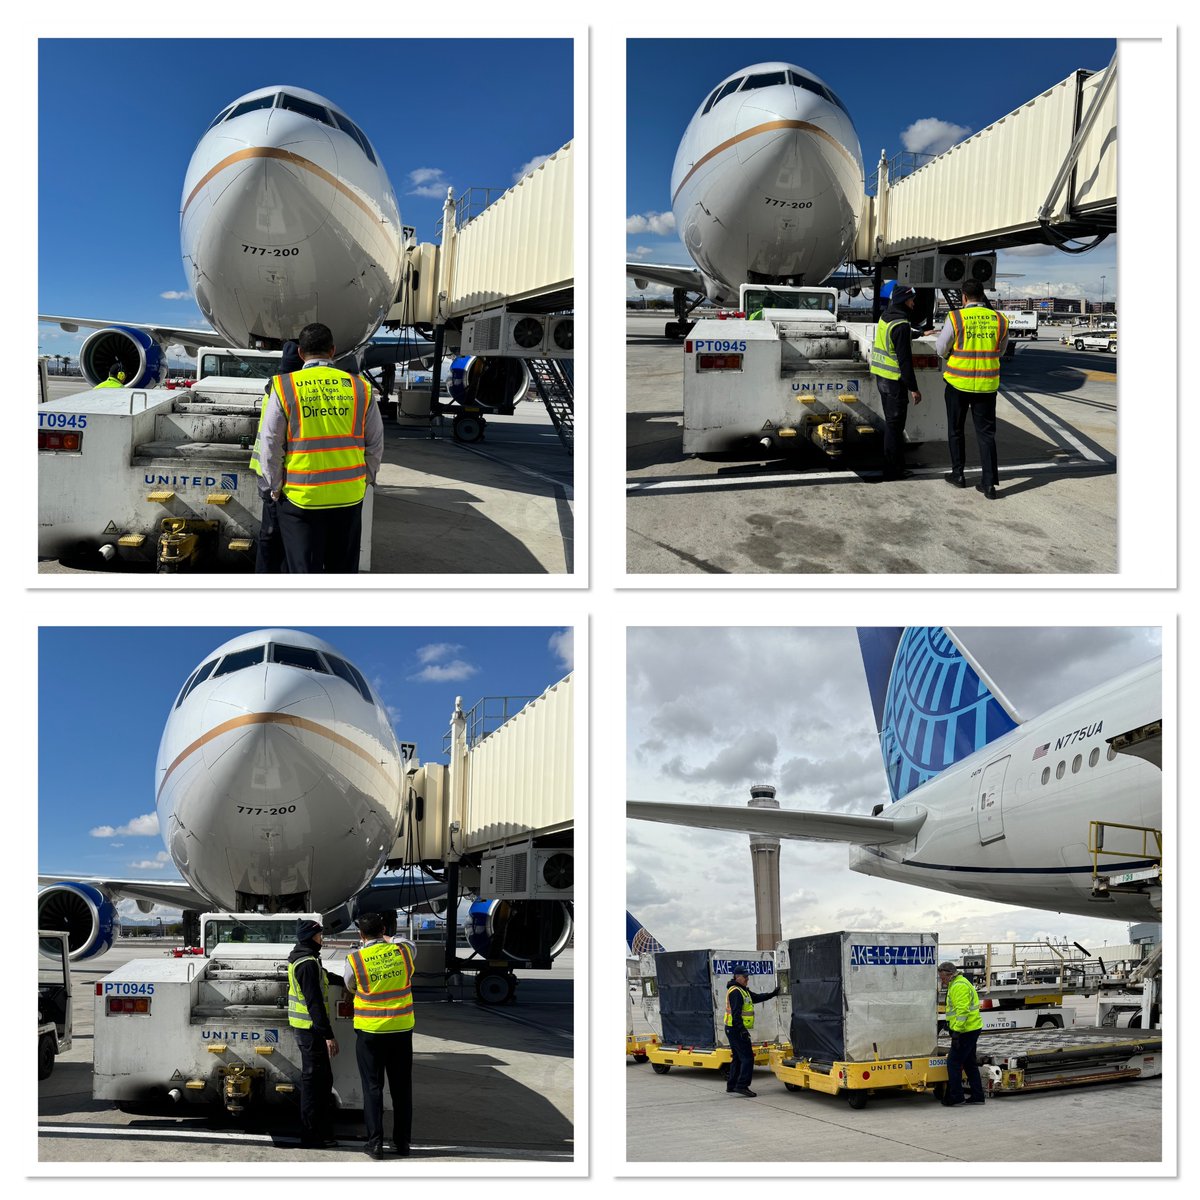 Thank you to our LAS team for working together & working safely! And thank you to our Director General manager, James Trudeau for supporting the team! Especially when we have extra flights and widebody aircrafts like today! @AOSafetyUAL @JTrudeau97 @GBieloszabski @jacquikey